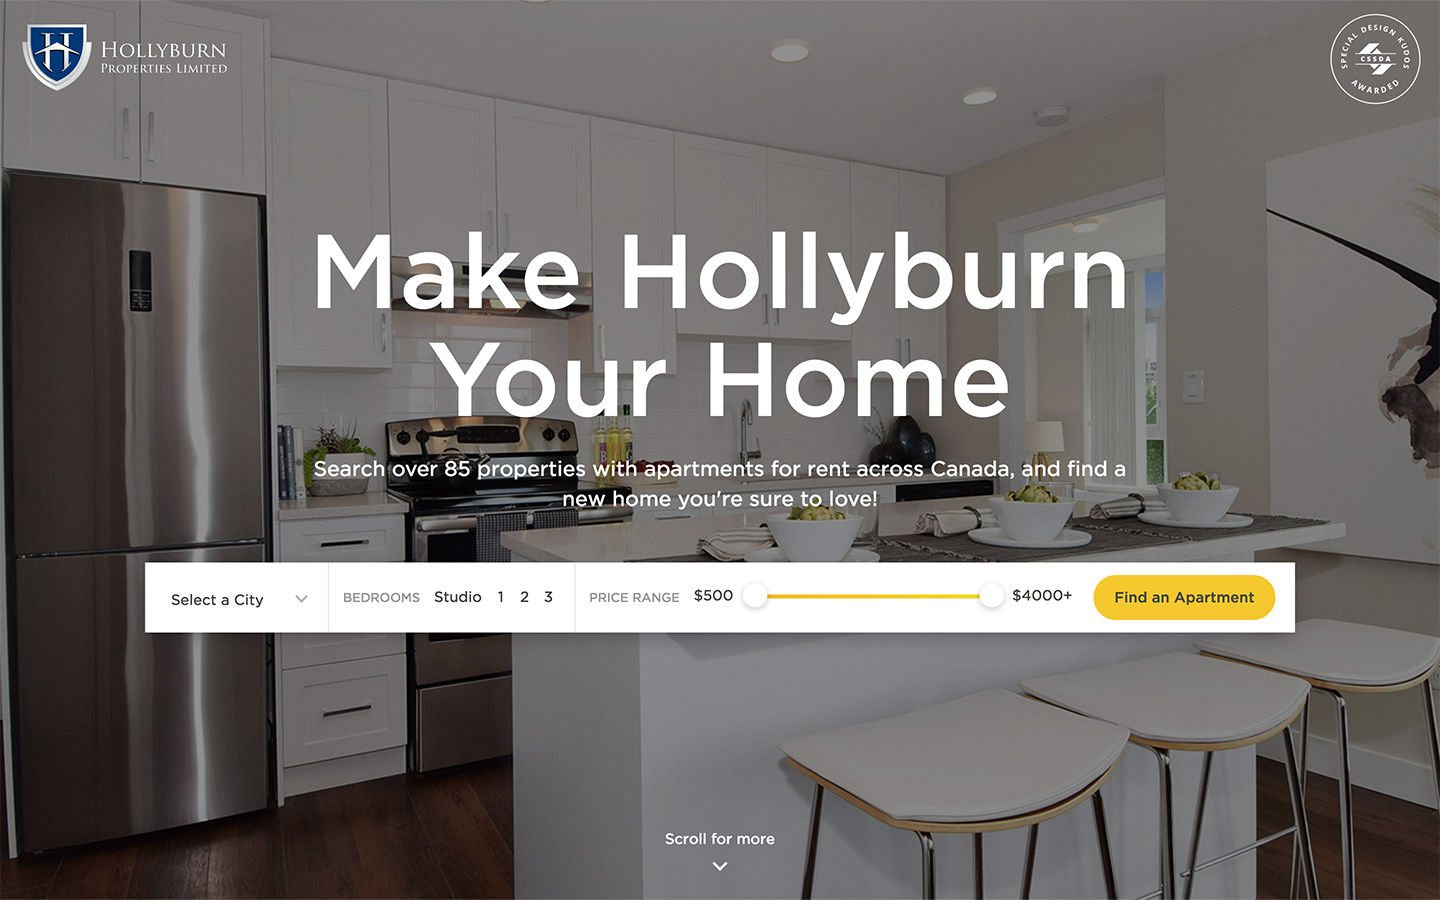 Hollyburn Properties Limited